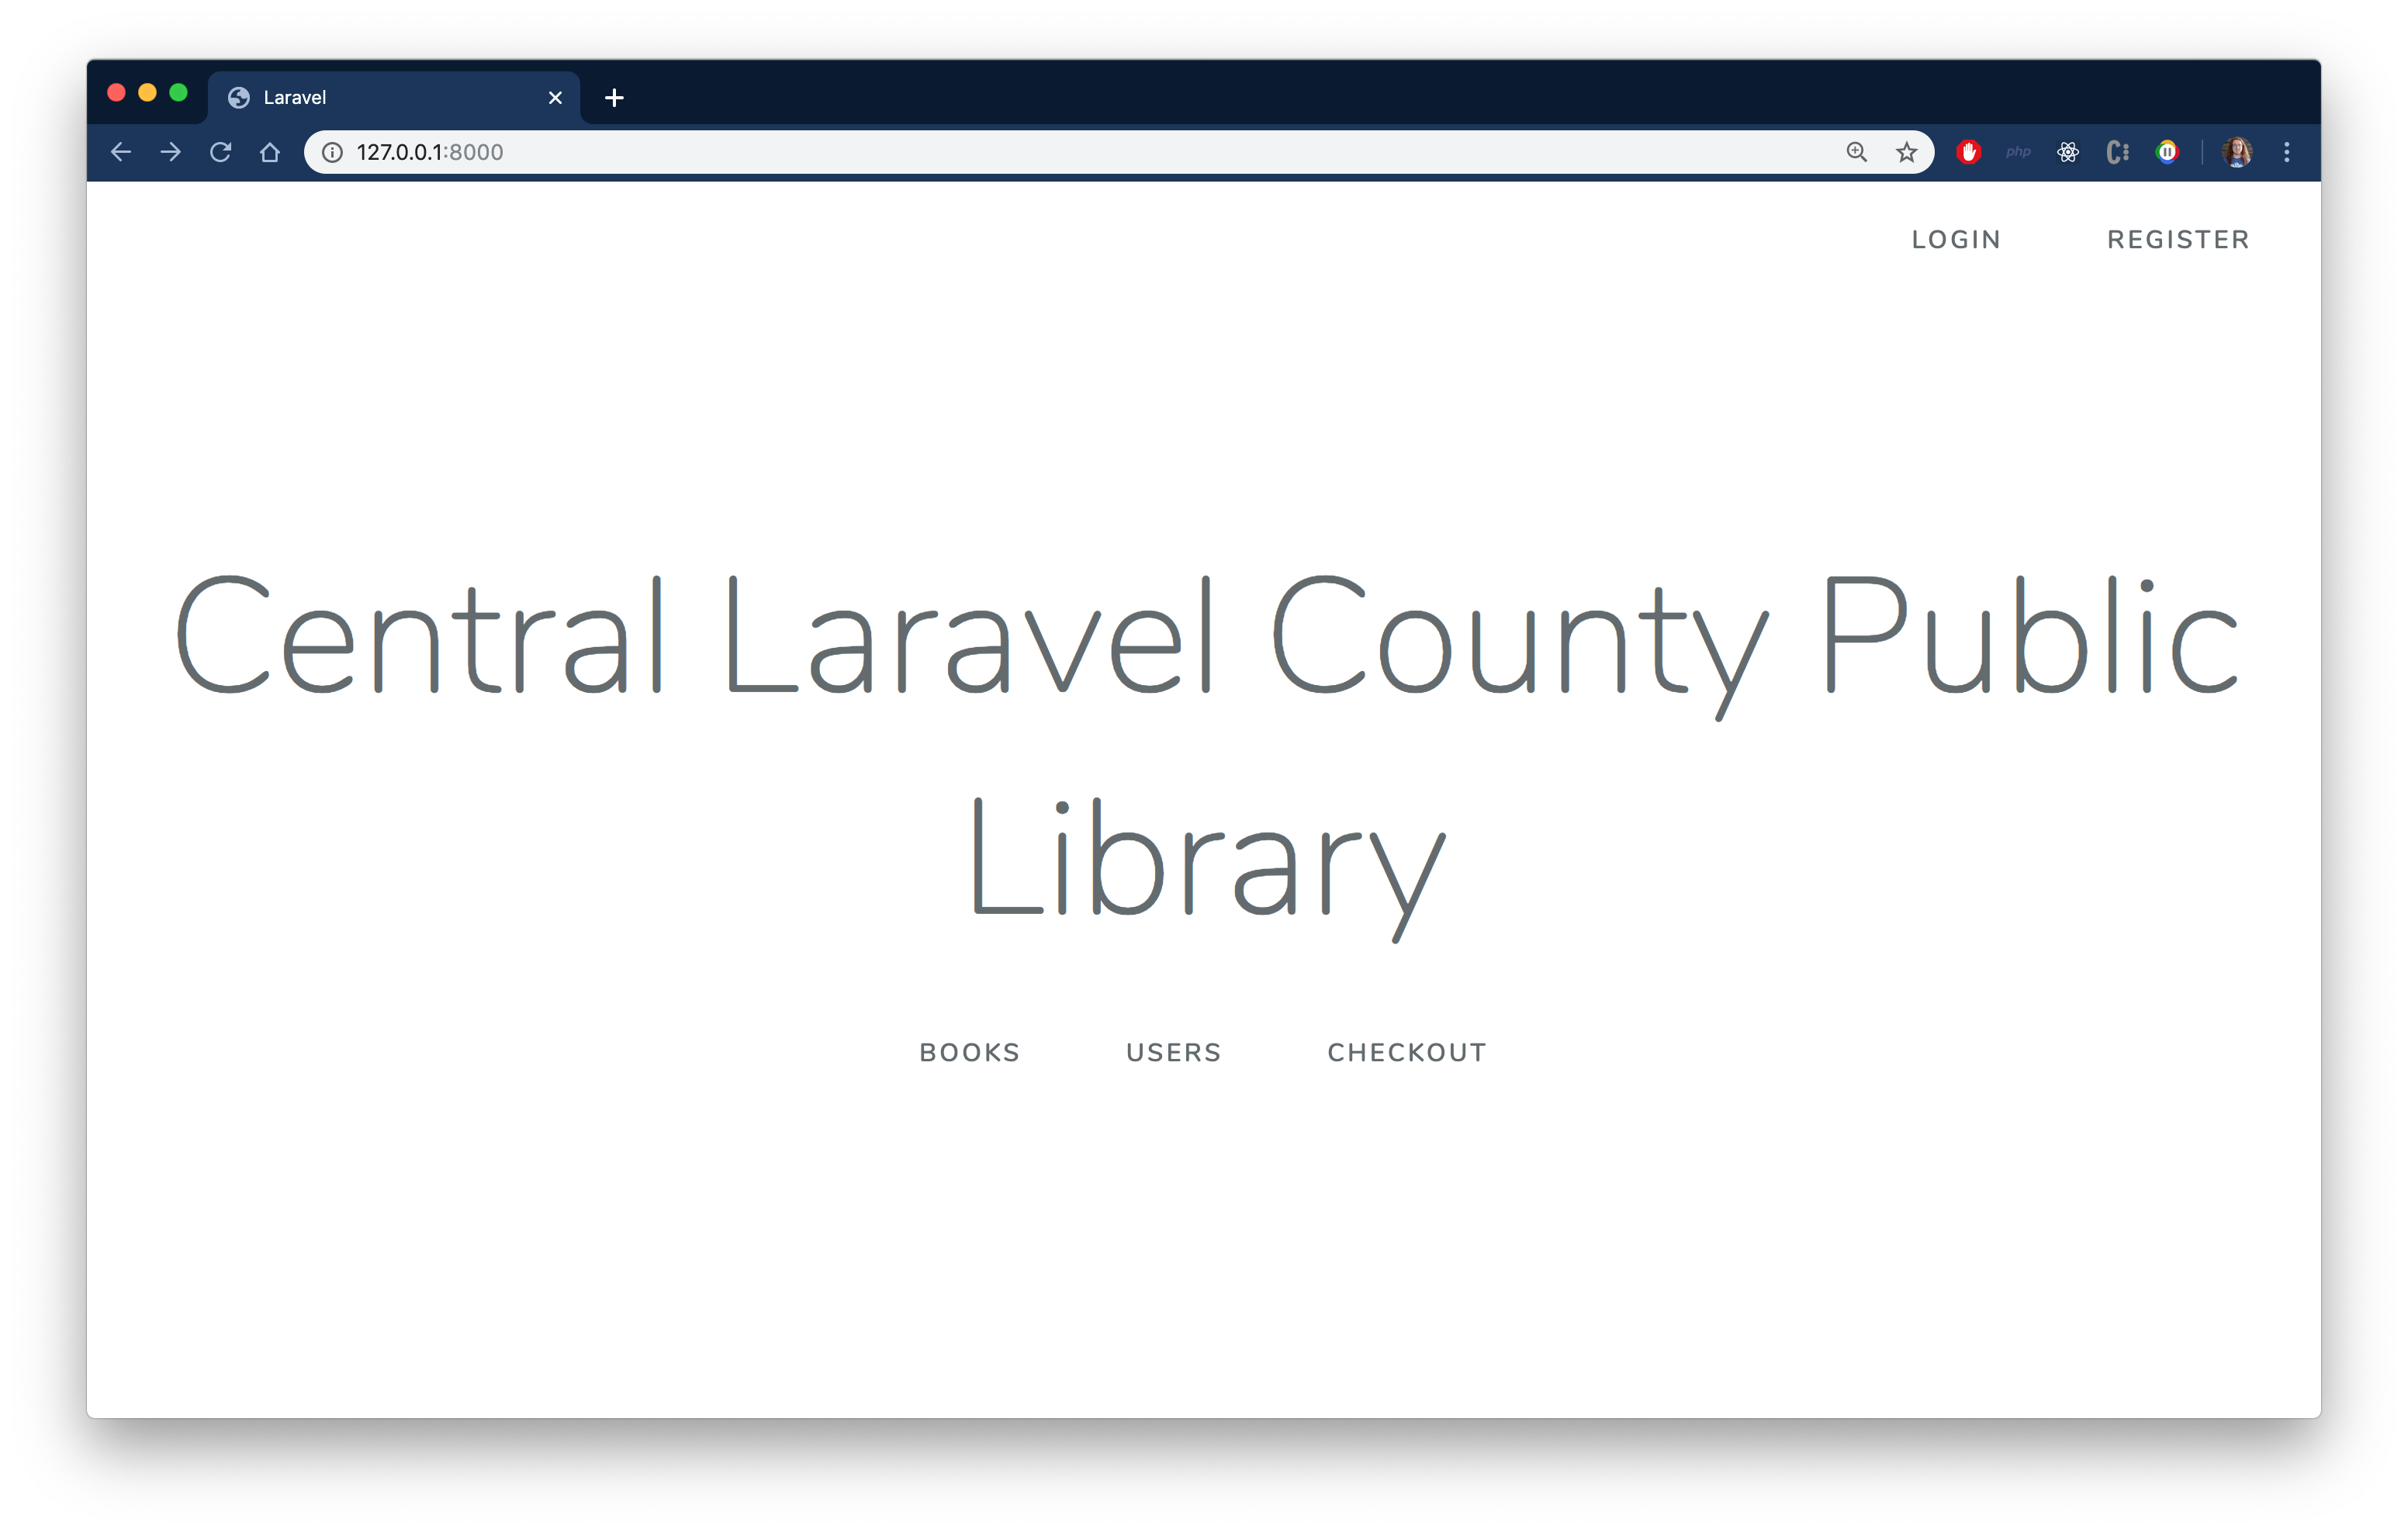 A screenshot of my Laravel Library project